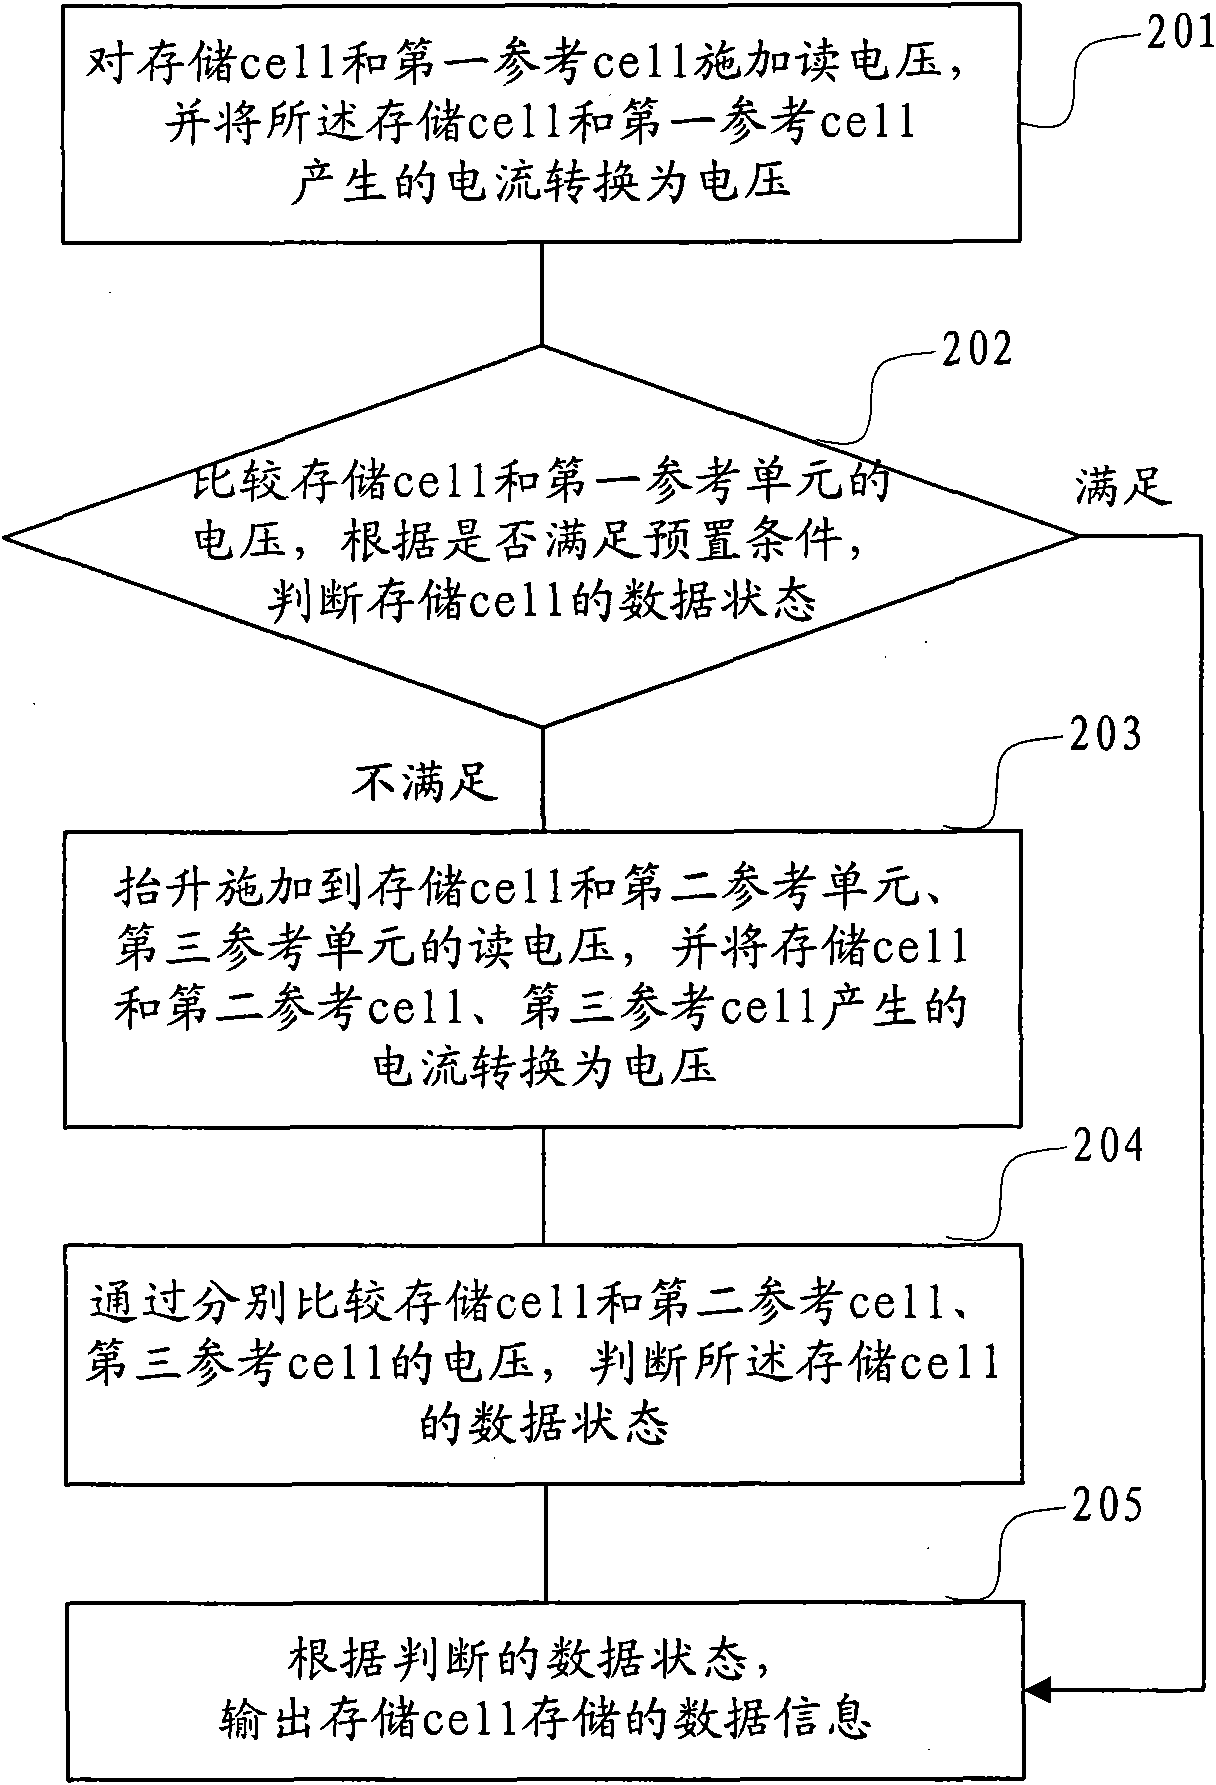 Data reading method for memory cell and sensitive amplifier used for multi-level cell (MLC)